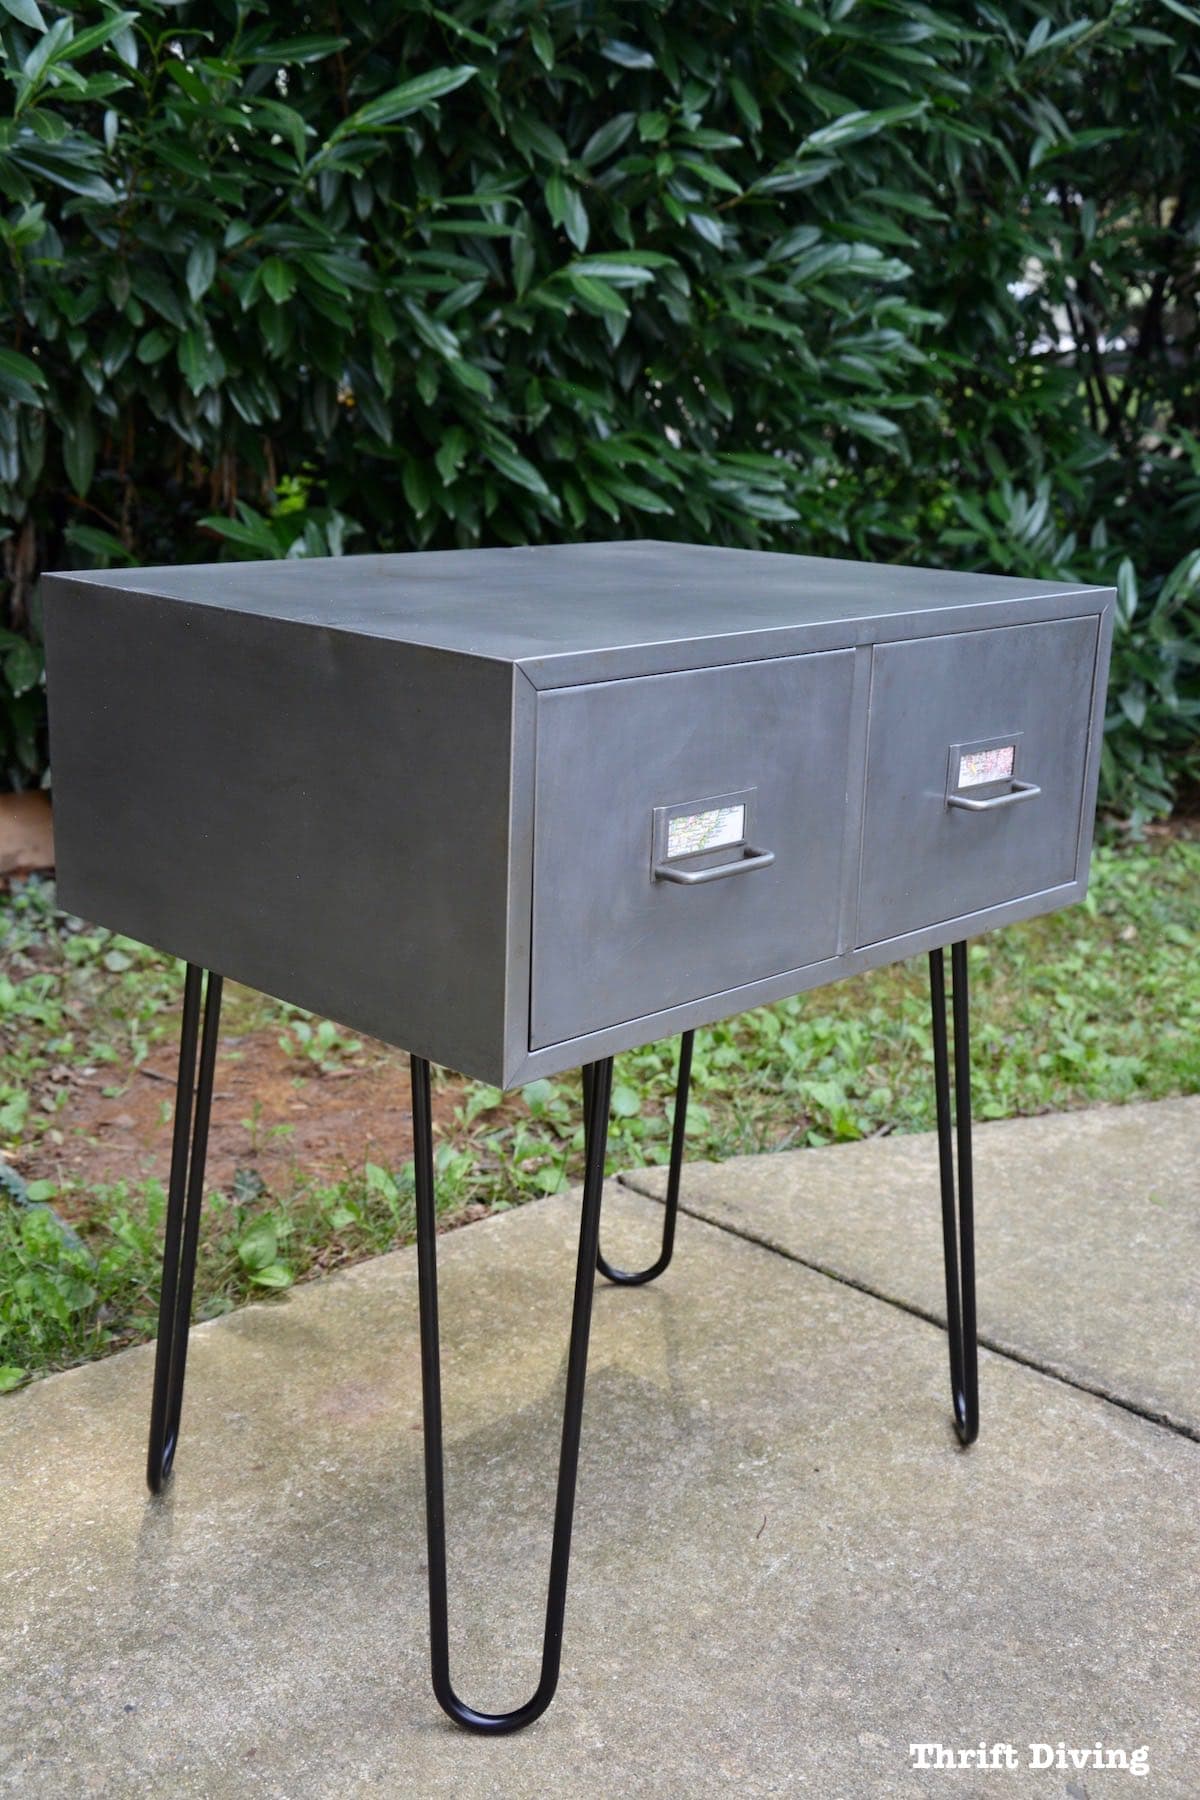 Add hairpin legs on a vintage metal cabinet from the thrift store for an industrial furniture design for your home. Create this look for under $100. | Thrift Diving